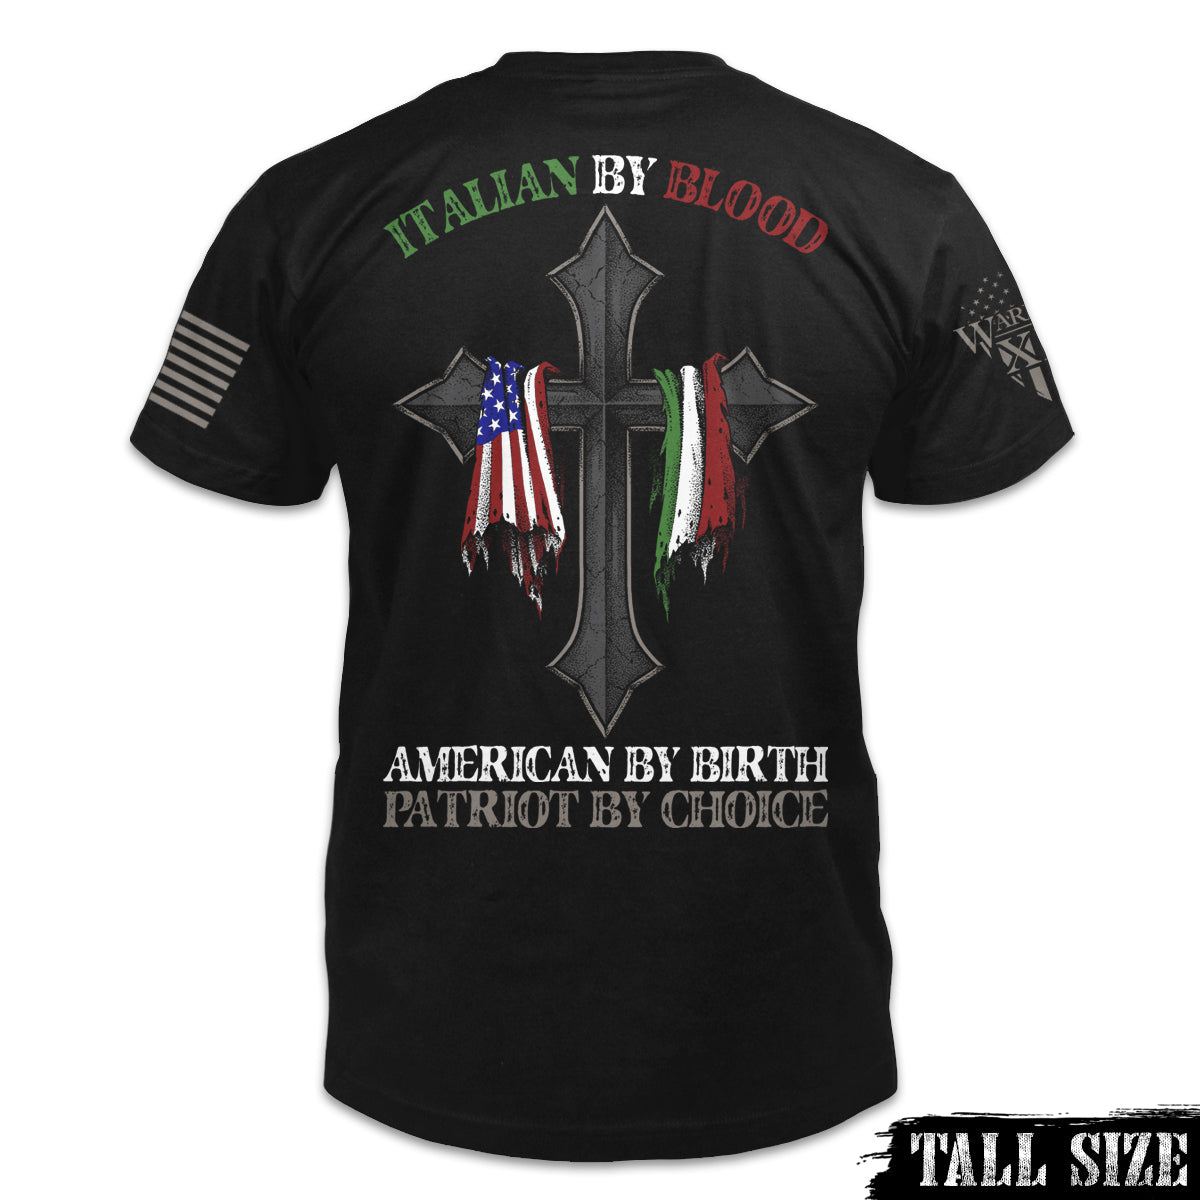 Italian By Blood - Tall Size